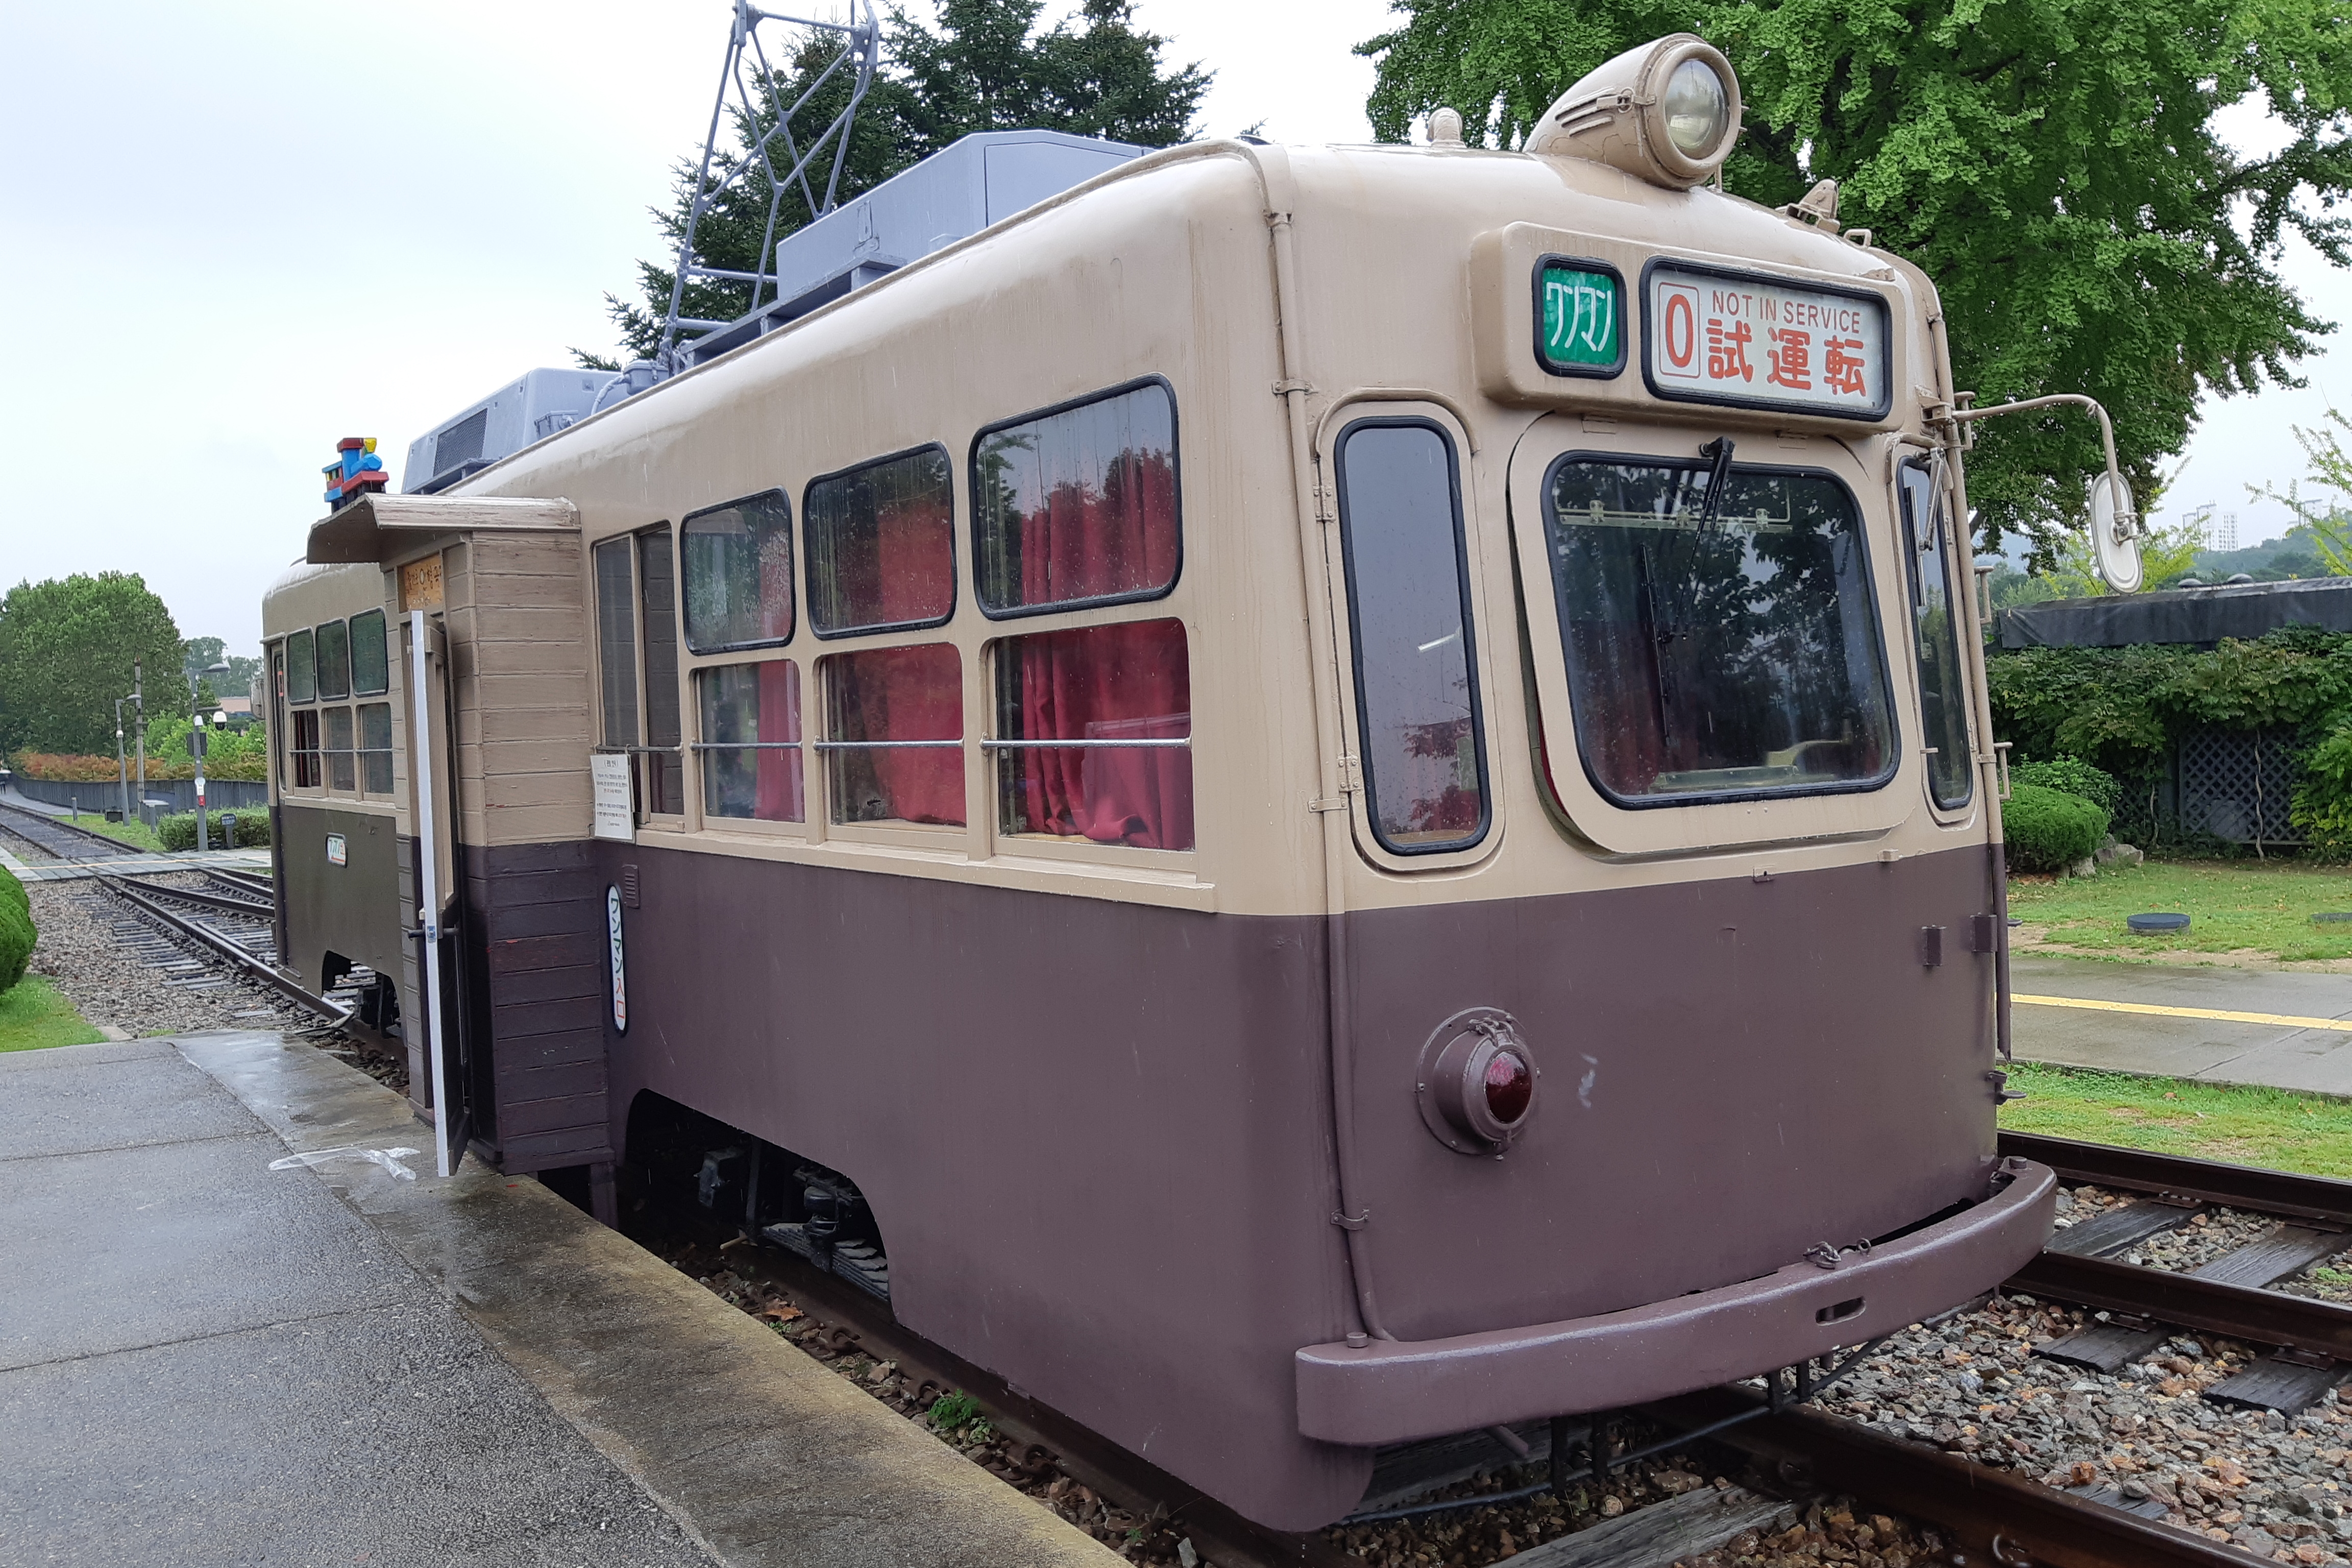 Hwarangdae Railroad Park0 : an old train-shaped exterior exhibit that can enter inside